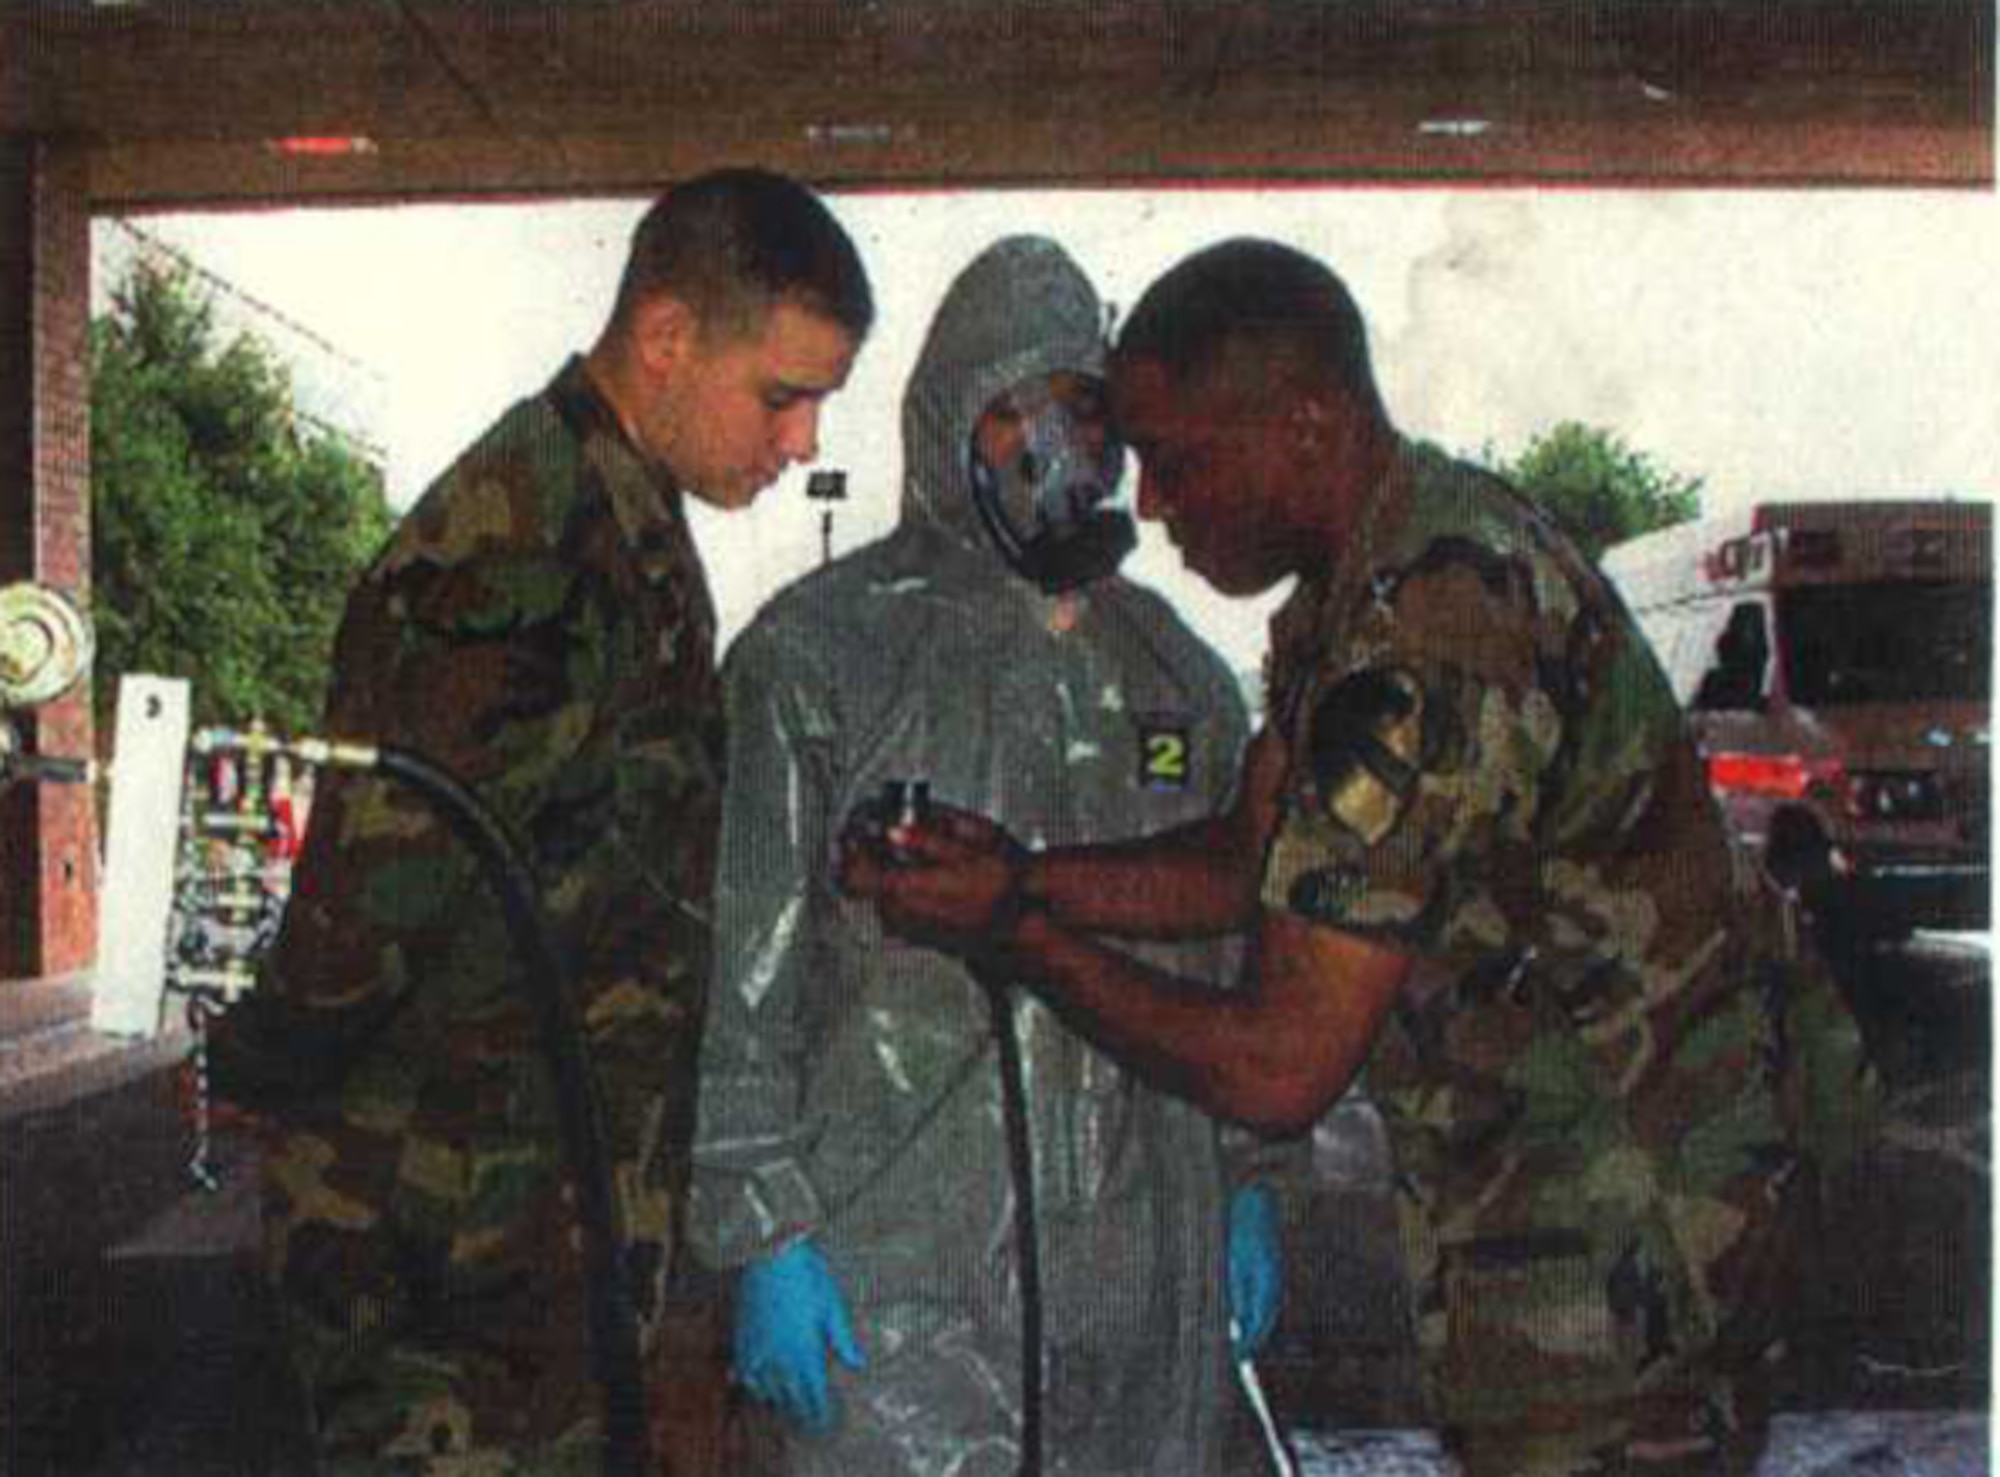 Then, Army Staff Sgt. Bernard Lawson working with a team of CBRN specialist to establish the first patient decontamination team at Brooke Army Medical Center on Fort Sam Houston, Texas, circa 2003. Lawson was at BAMC recovering from major nerve damage to his right side after a routine response call to VX gas at Johnston Atoll, a former chemical, weapons storage and demilitarization site. Through hard work and help from others, like Wounded Warriors, he continues to recover and is currently the emergency manager for the Air Force Installation and Mission Support Center. (U.S. Air Force courtesy photo)